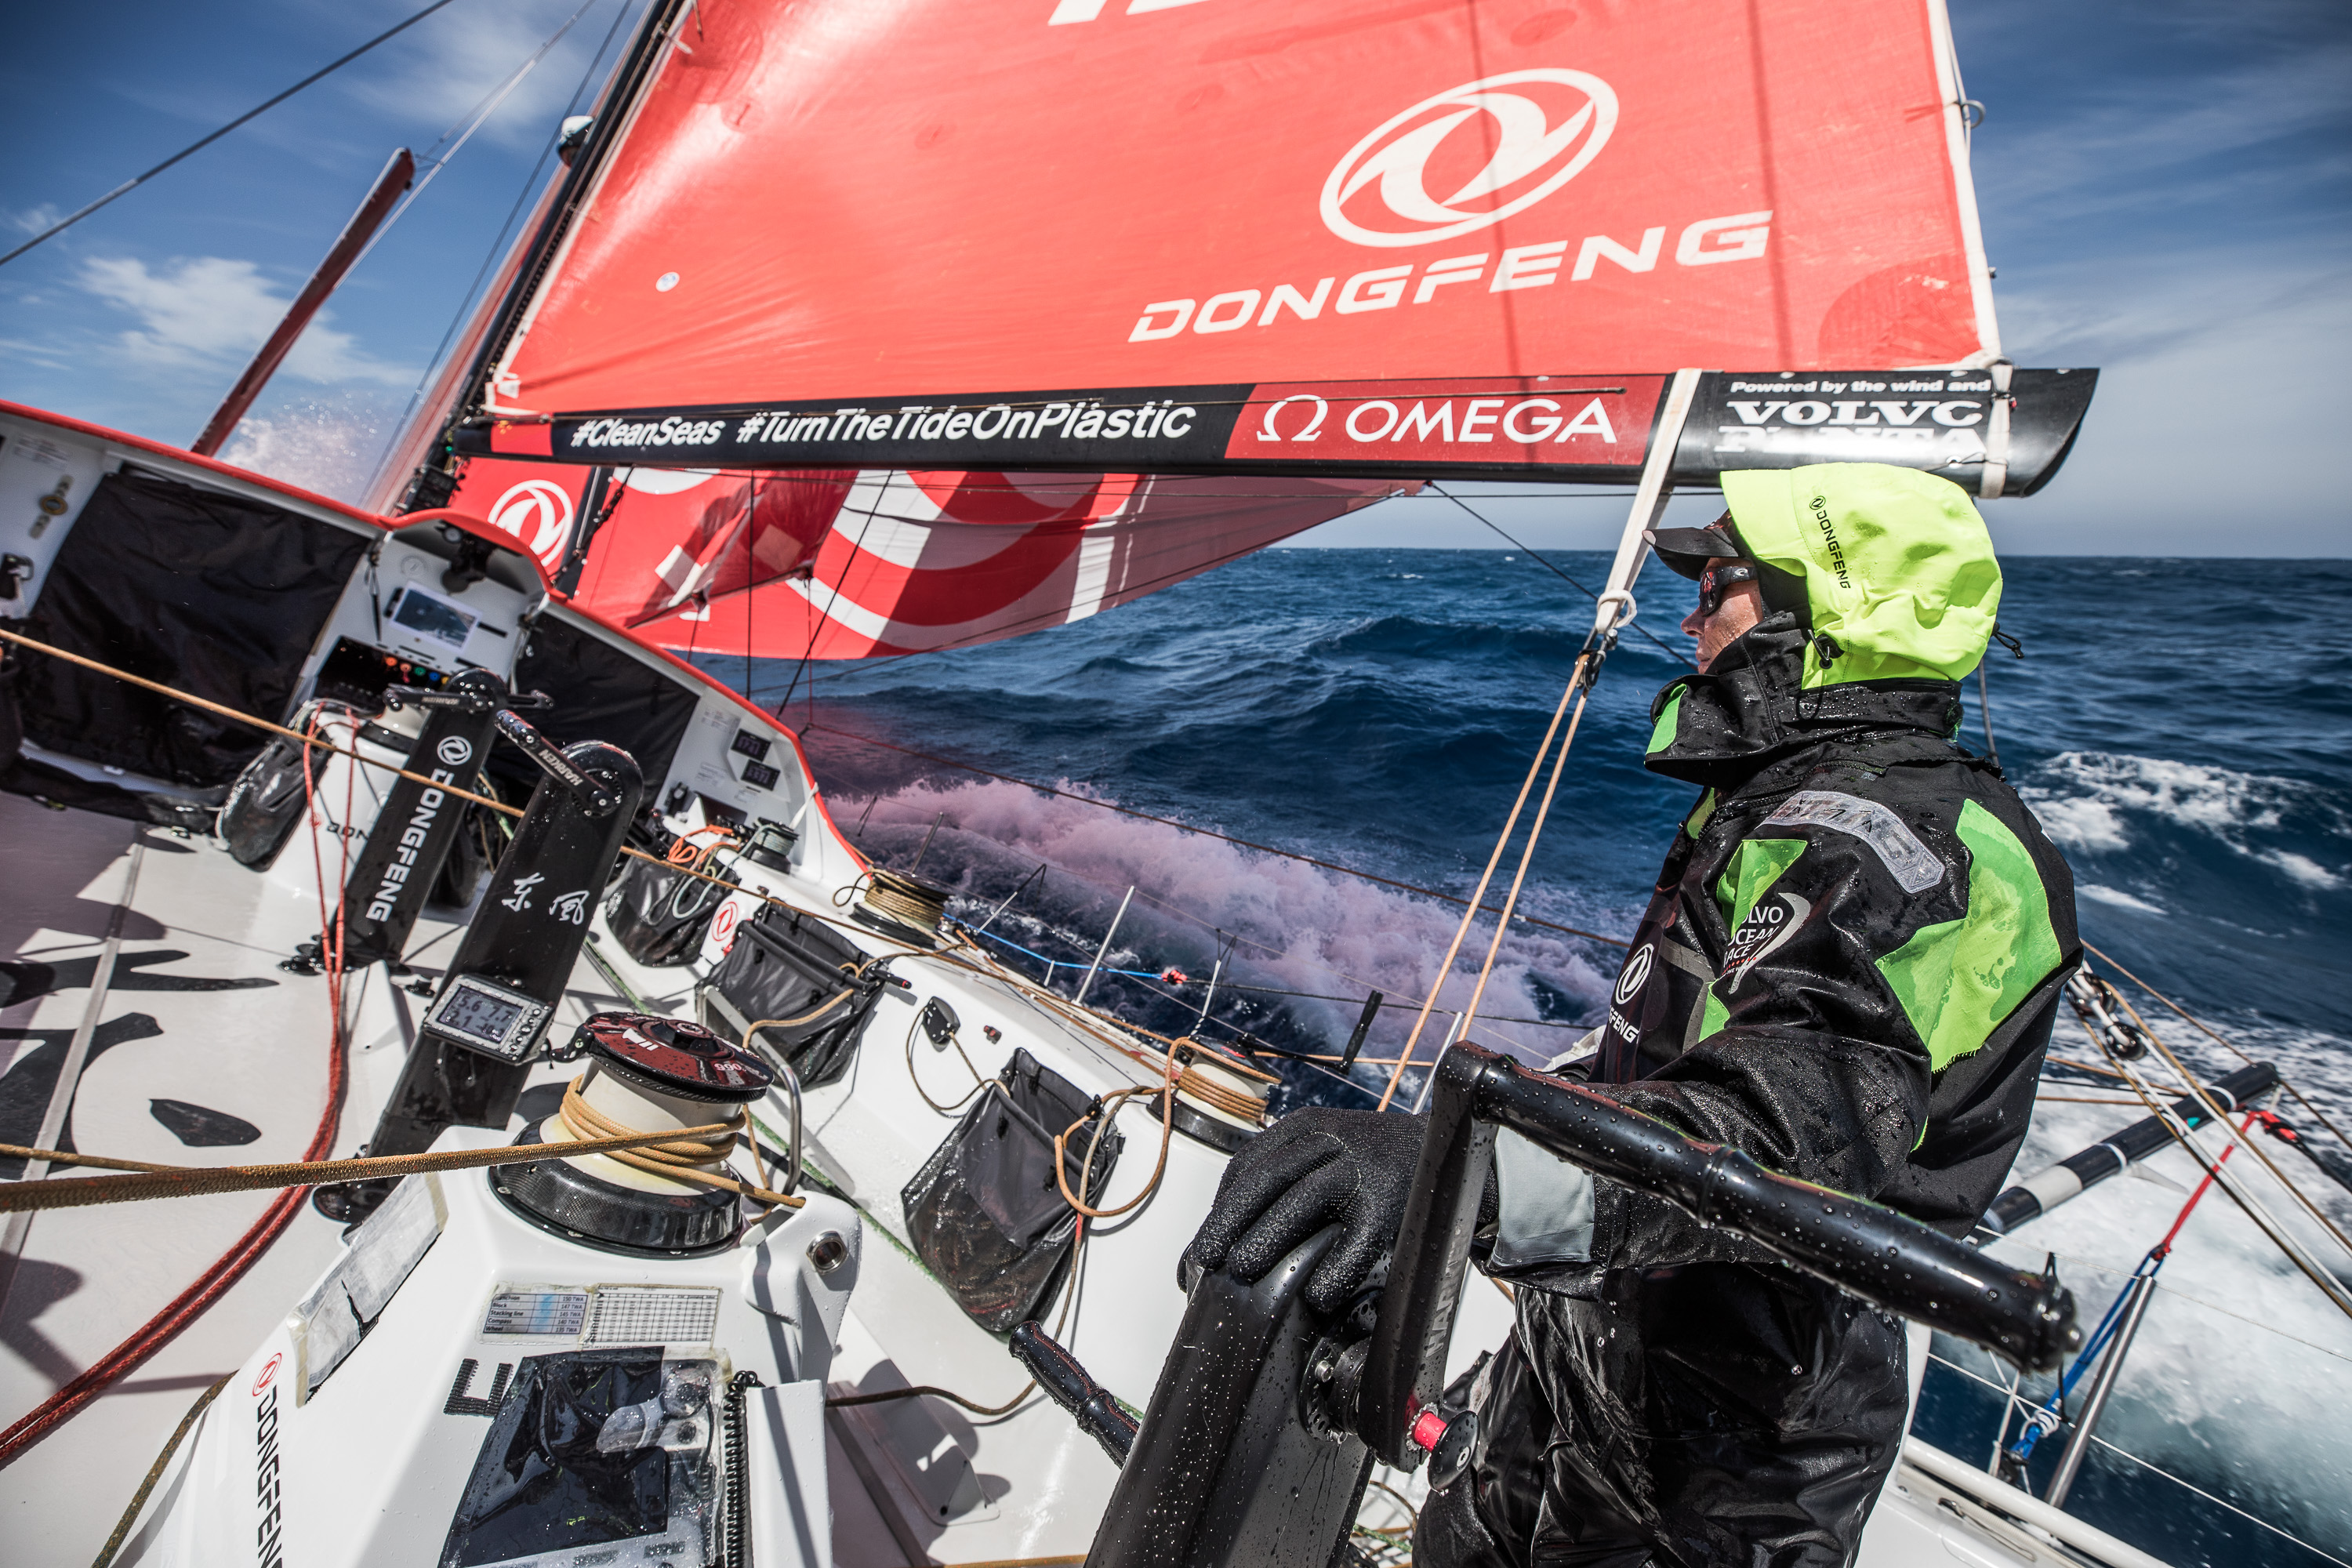 Leg 3, Cape Town to Melbourne, day 09, on board Dongfeng. Carolijn Brouwer enjoying the cold ride in the Indian Ocean. 3Photo by Martin Keruzore/Volvo Ocean Race. 18 December, 2017.